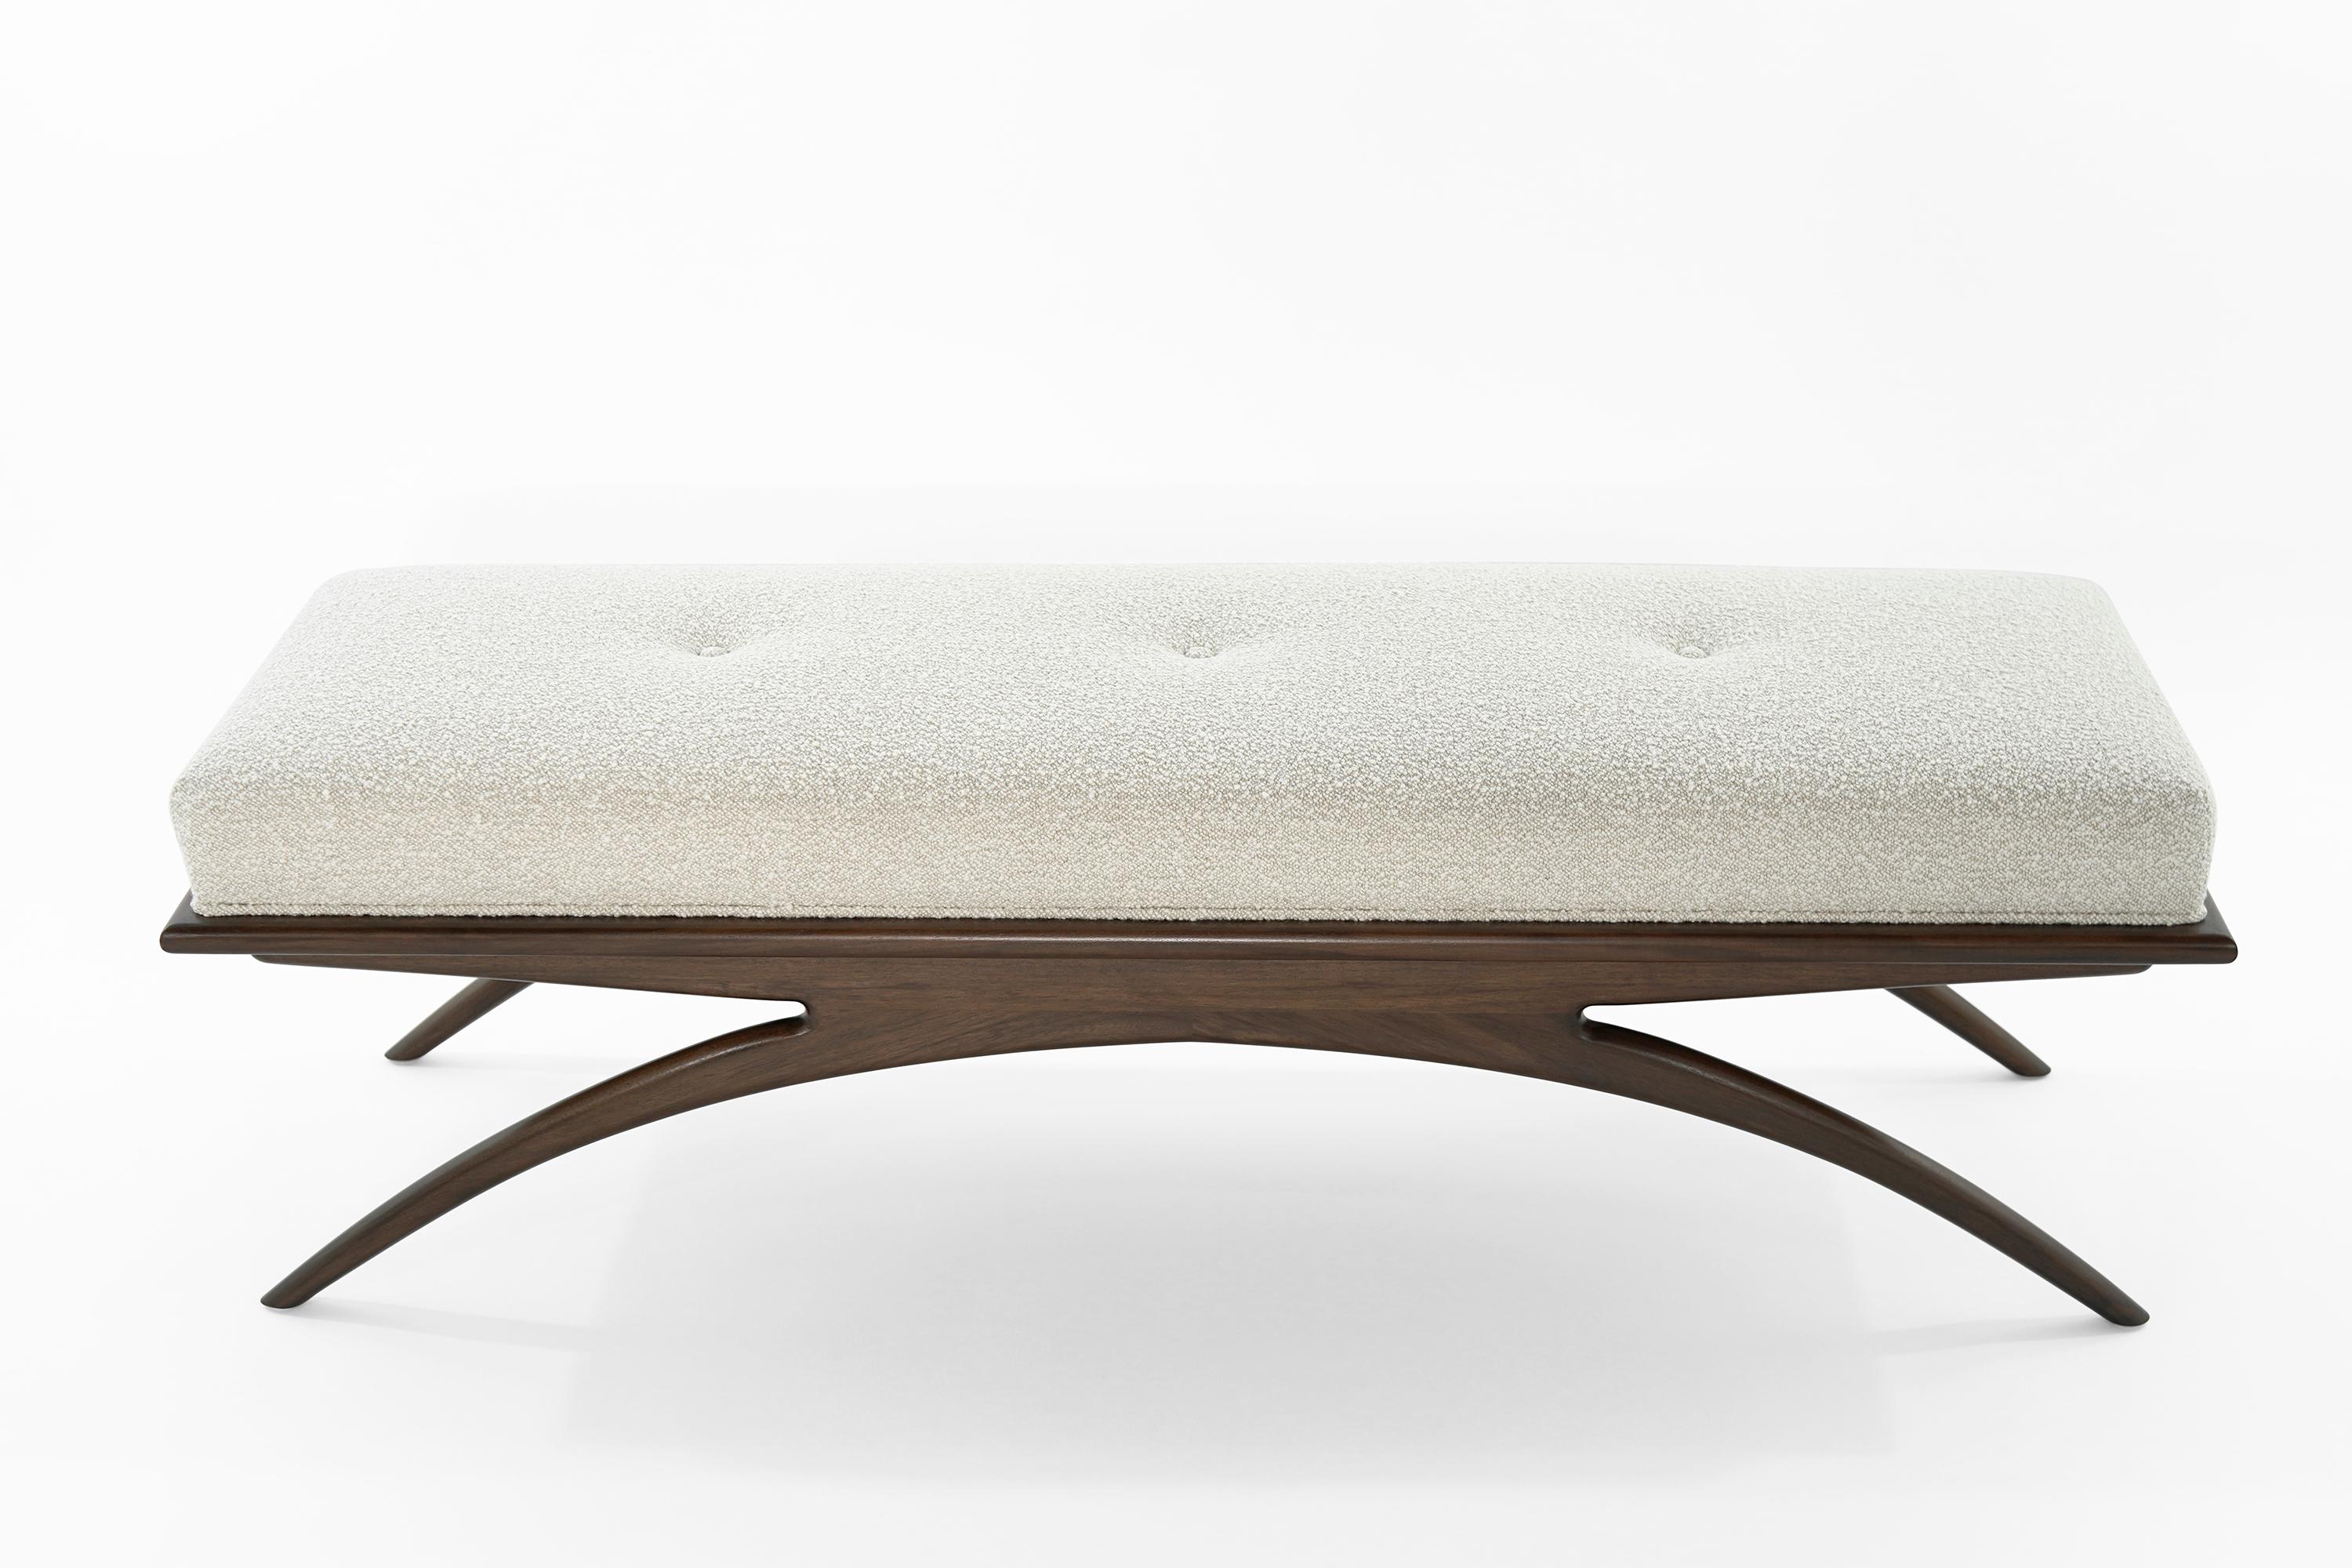 Artfully balanced. This handcrafted bench has a lightweight aesthetic with solid construction. The prim, rectangular cushion is beautifully upholstered in soft bouclé, resting delicately on a solid walnut base. Elevate your space with sloping curves